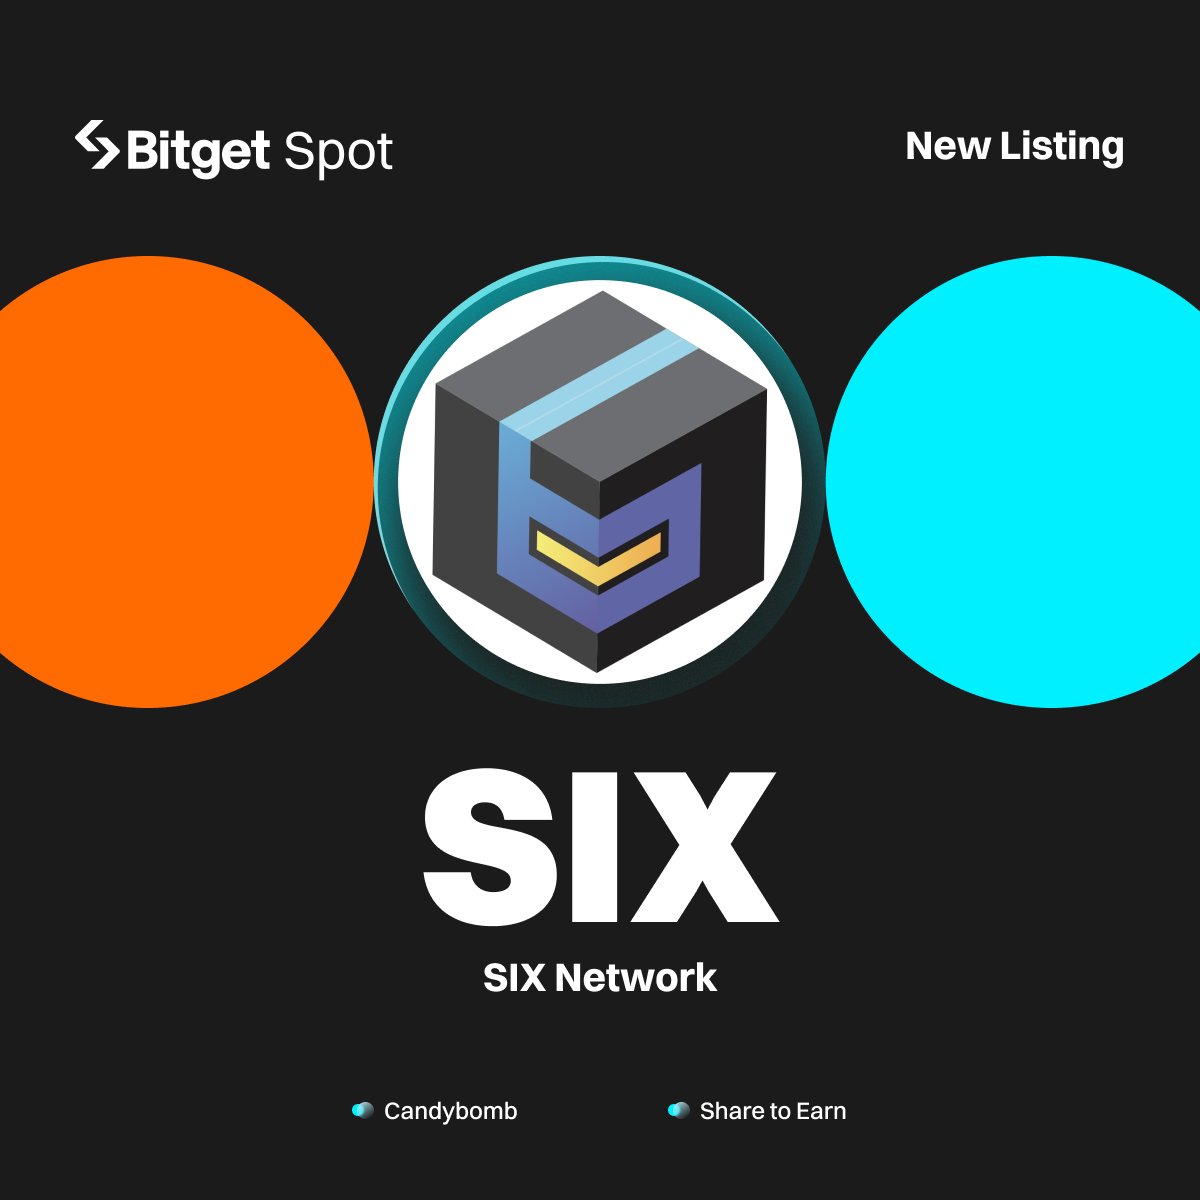 New Listing - $SIX @theSIXnetwork #Bitget will list SIX/USDT with $23,000 worth of SIX up for grabs! 🔹Deposit: opened 🔹Trading starts: April 29, 11:00 AM (UTC) More details: bitget.com/en/support/art… #SIXlistBitget